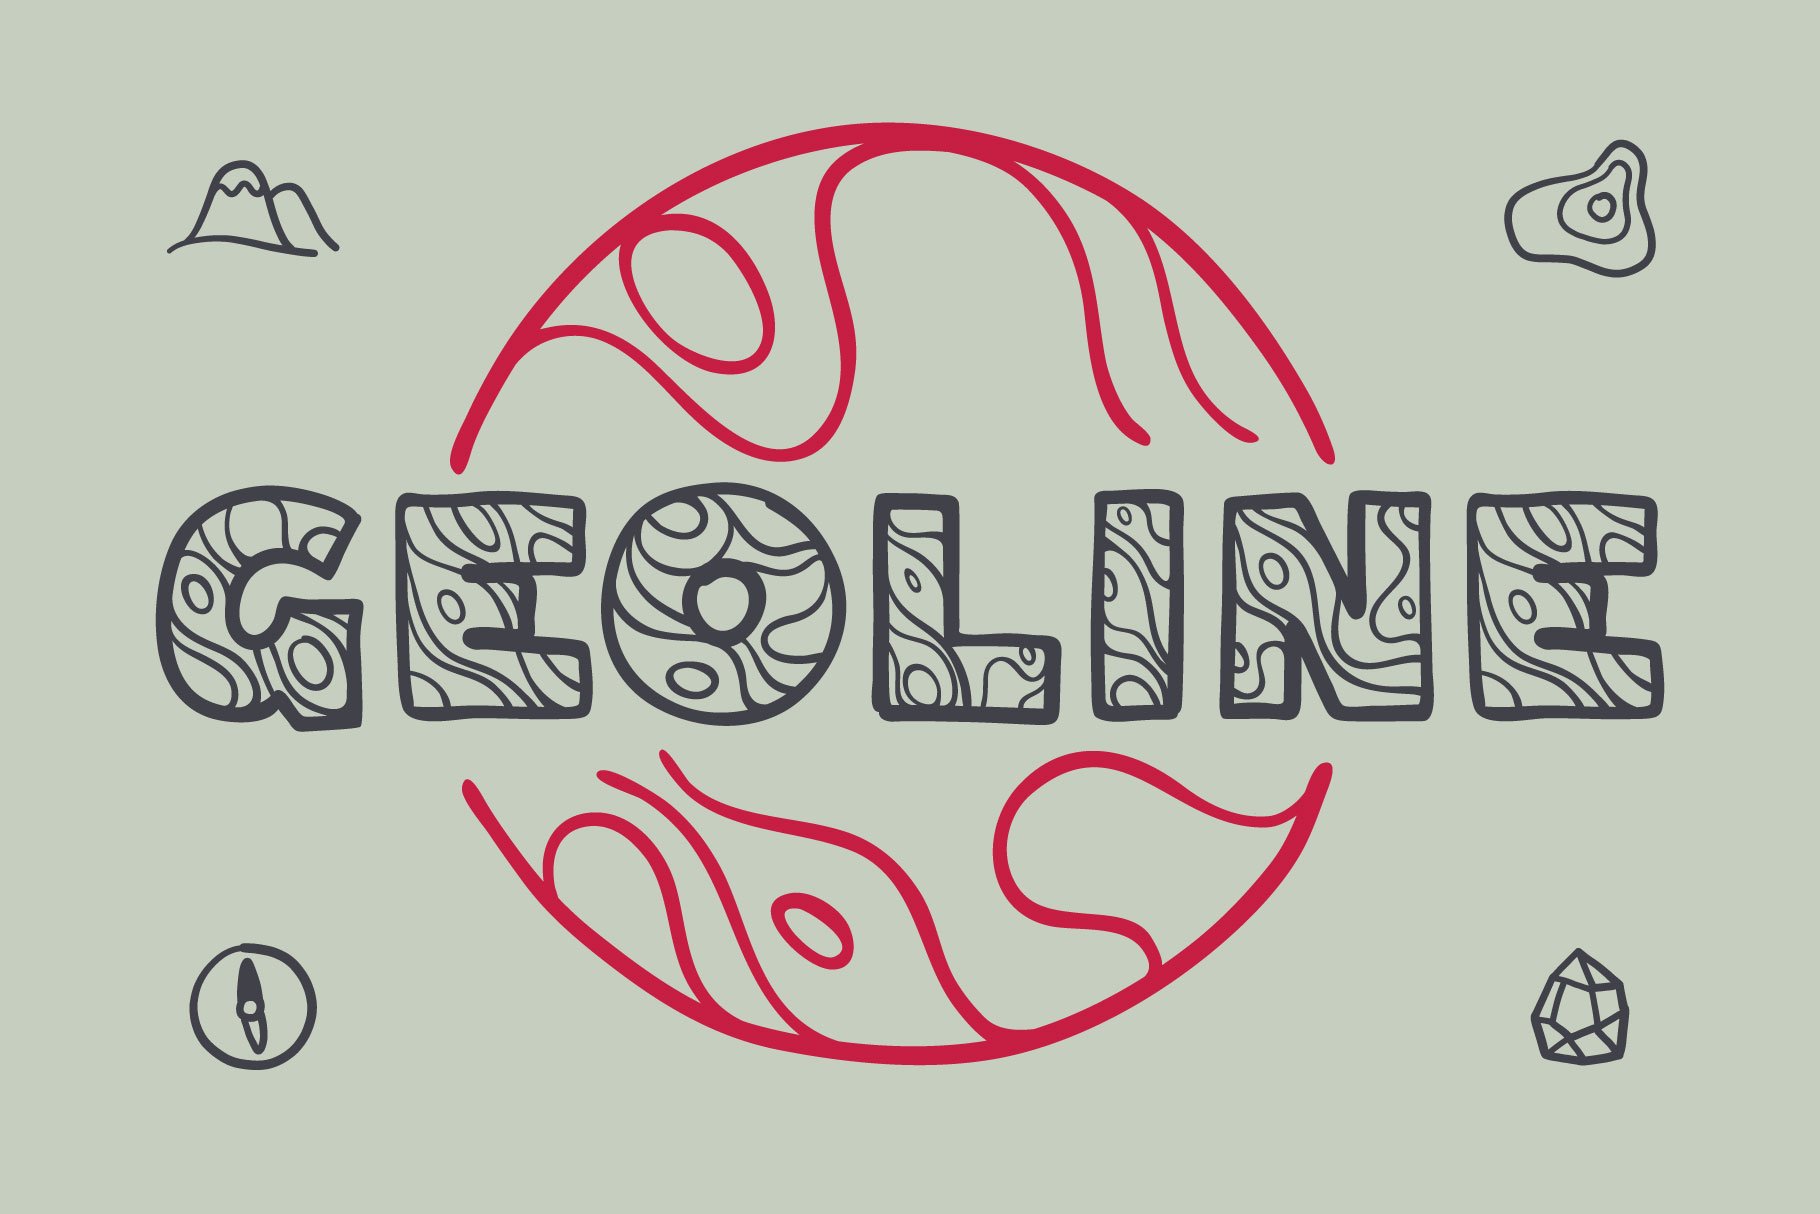 Geoline font cover image.